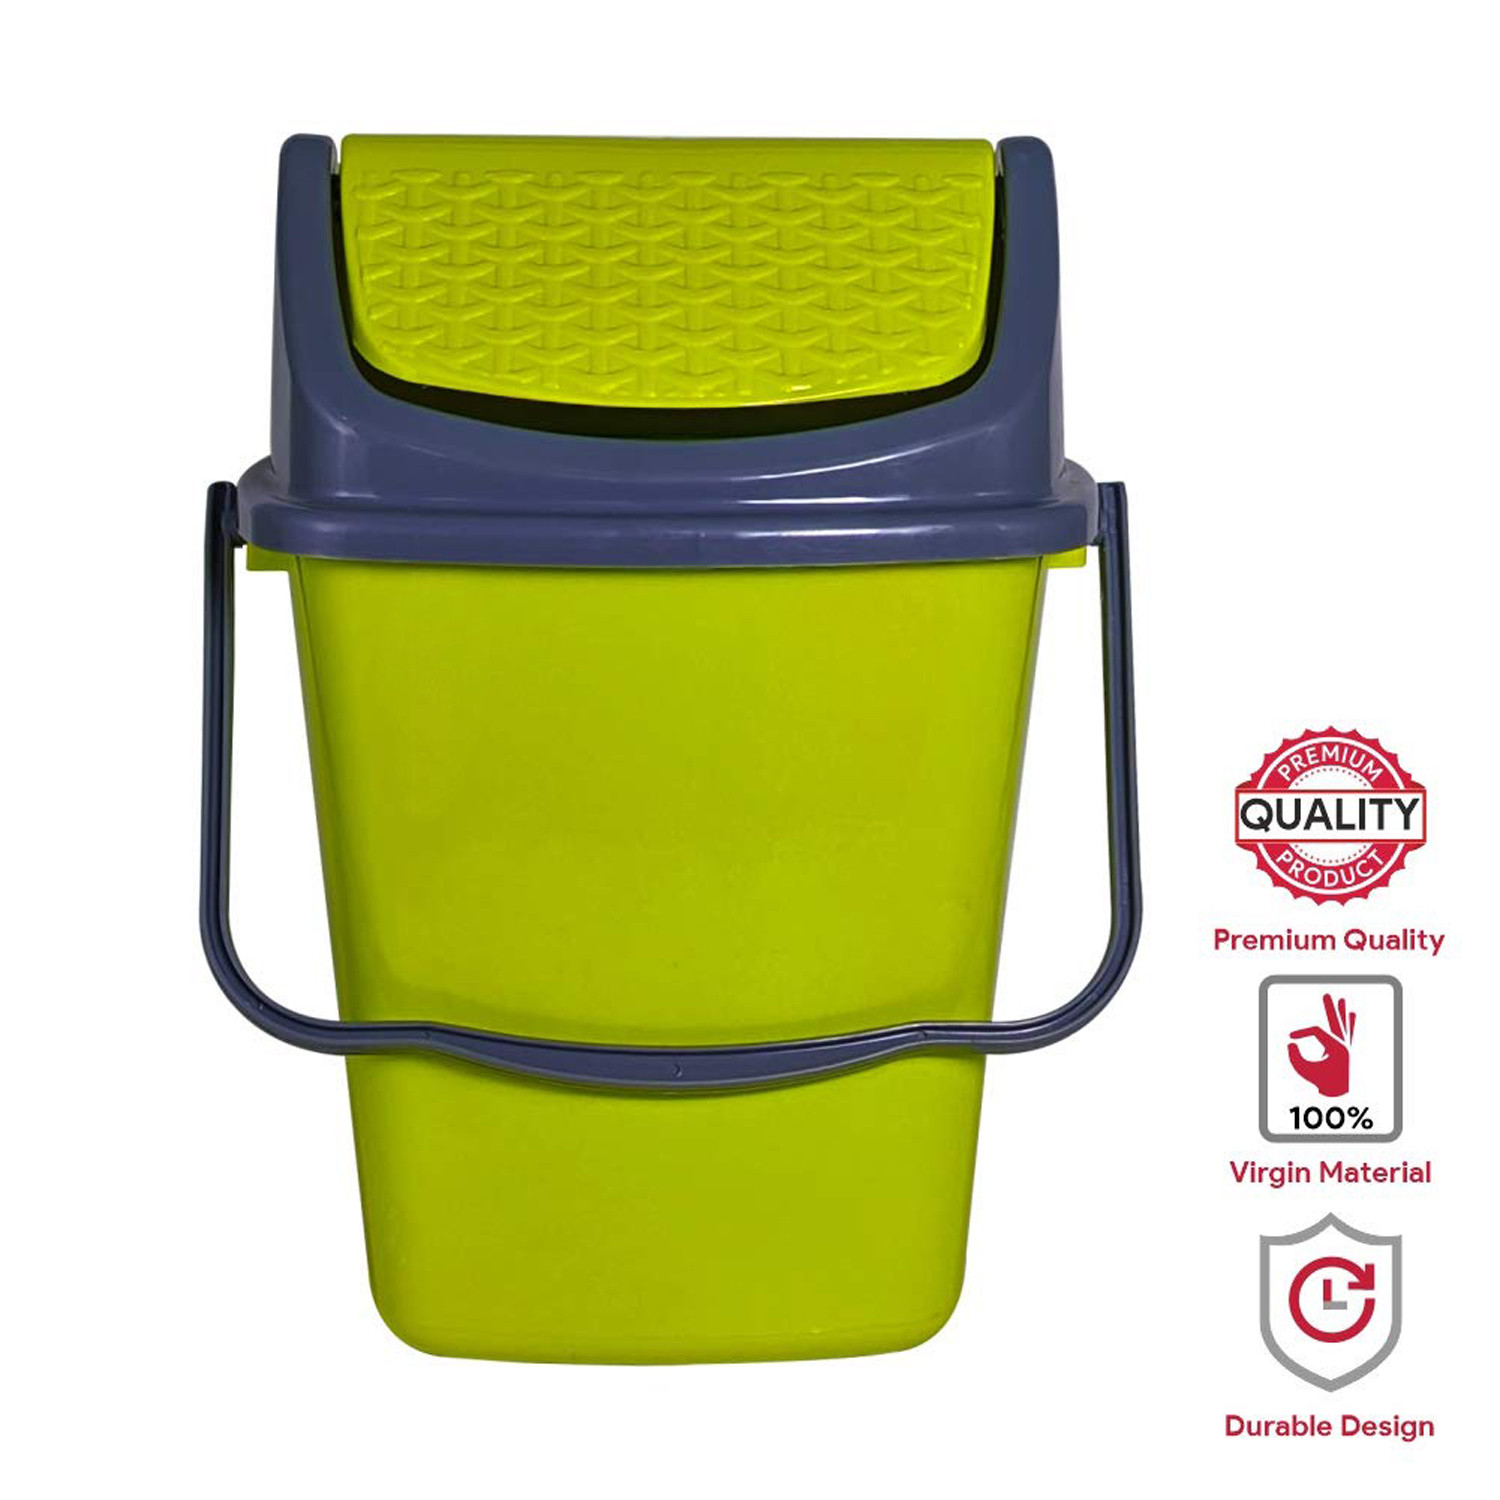 Kuber Industries Delight Plastic Swing  Garbage Waste Dustbin for Home, Office with Handle, 5 Liters (Green)